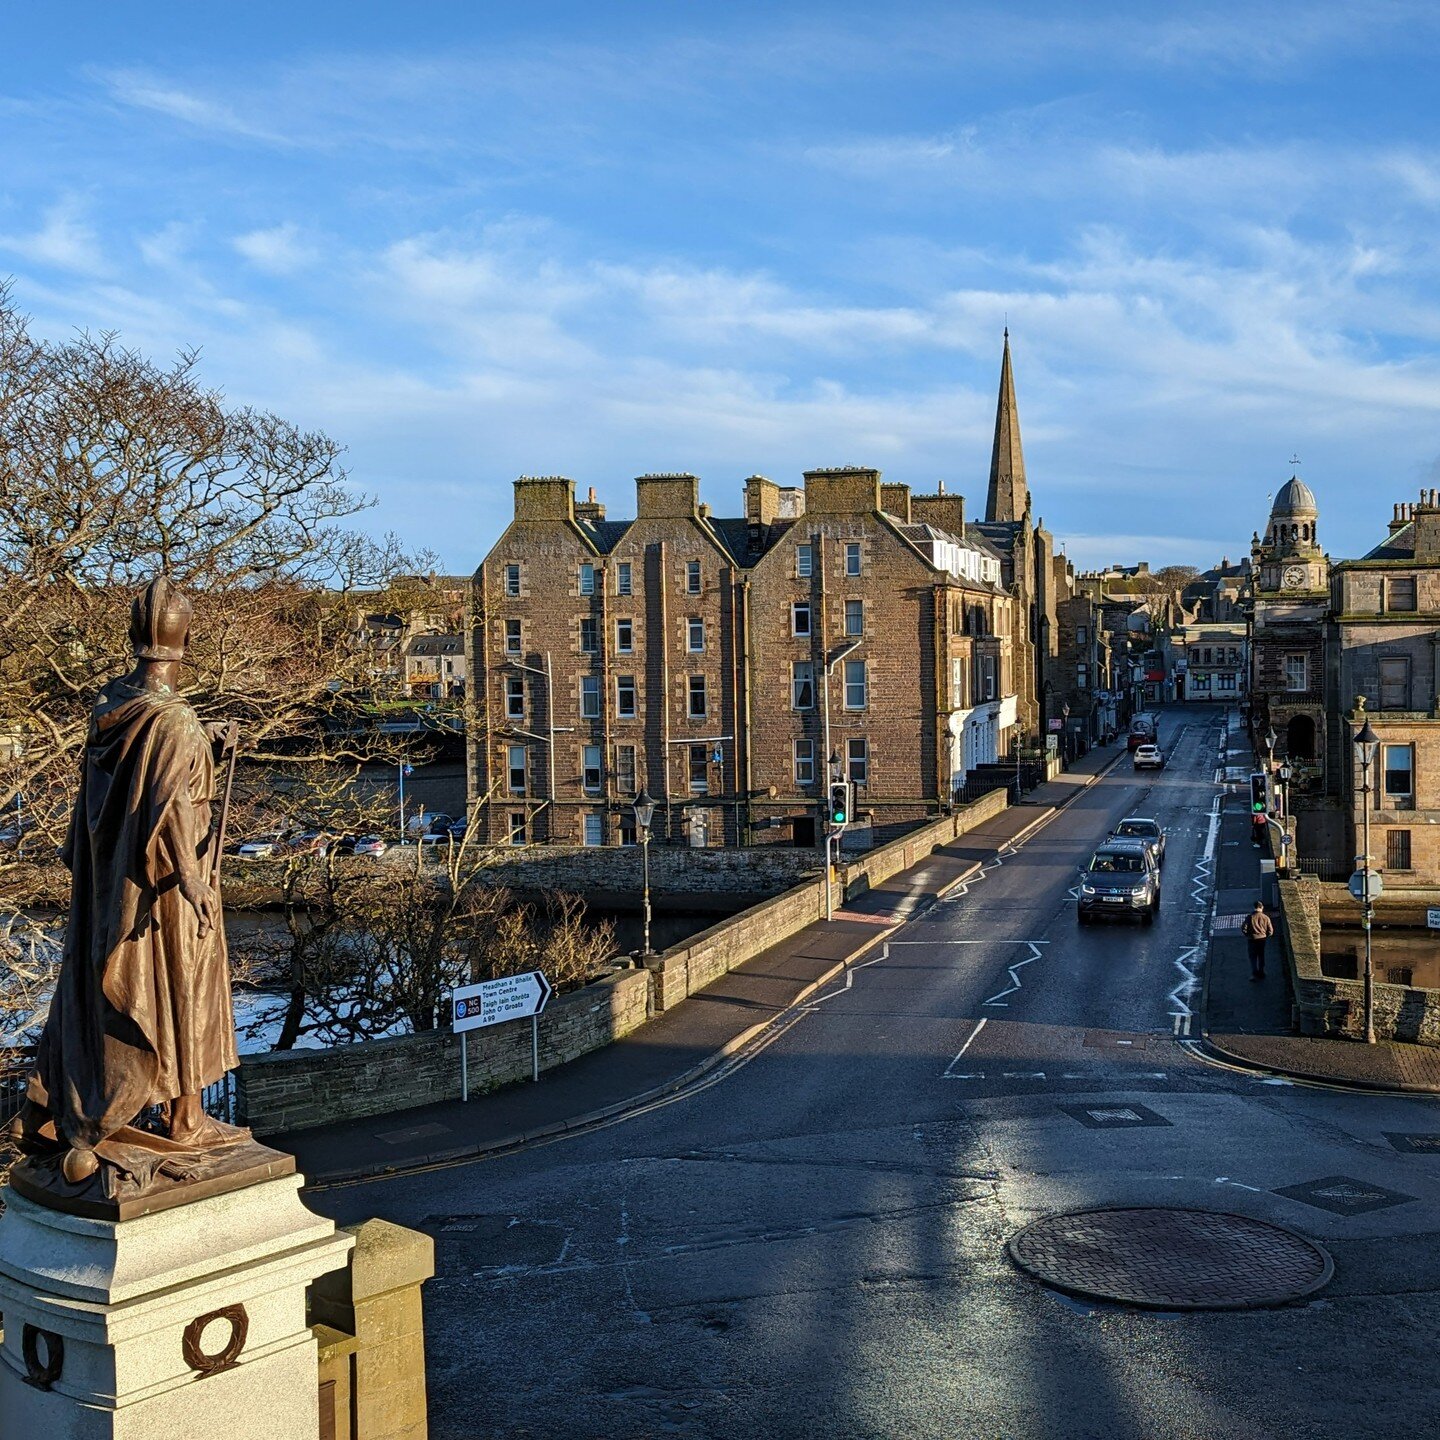 Early morning view of Wick bridge street from the war memorial.

#wick #caithness #nc500 #nc500accommodationsightsandtips #northscotland #highlands #scotland